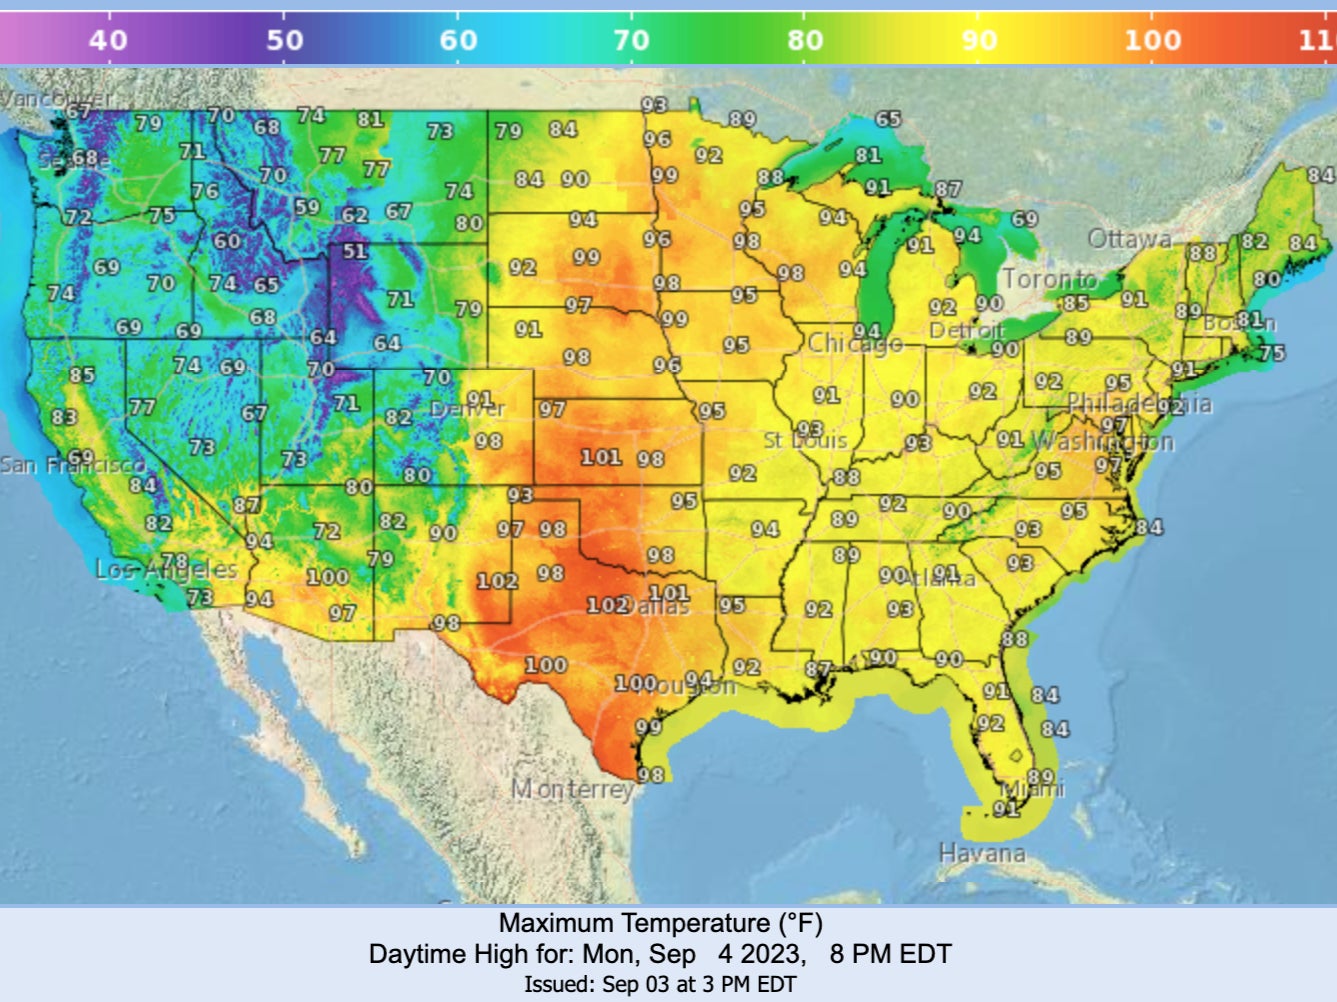 The heatwave expected for central, southern and eastern parts of the US on Labor Day